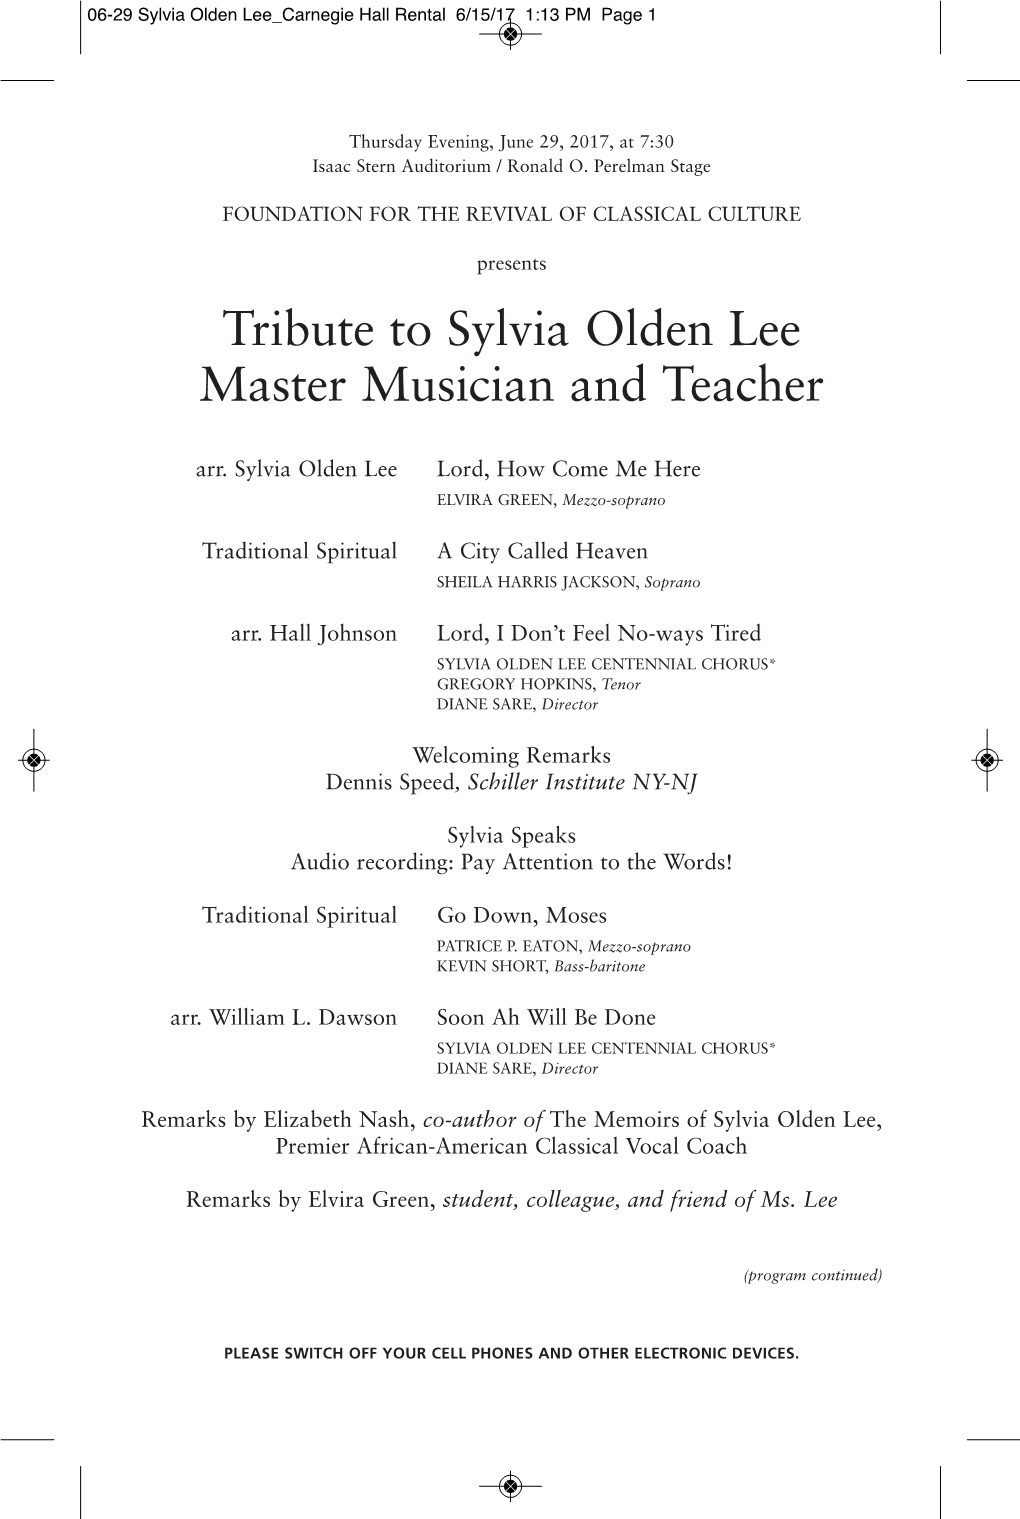 Tribute to Sylvia Olden Lee Master Musician and Teacher